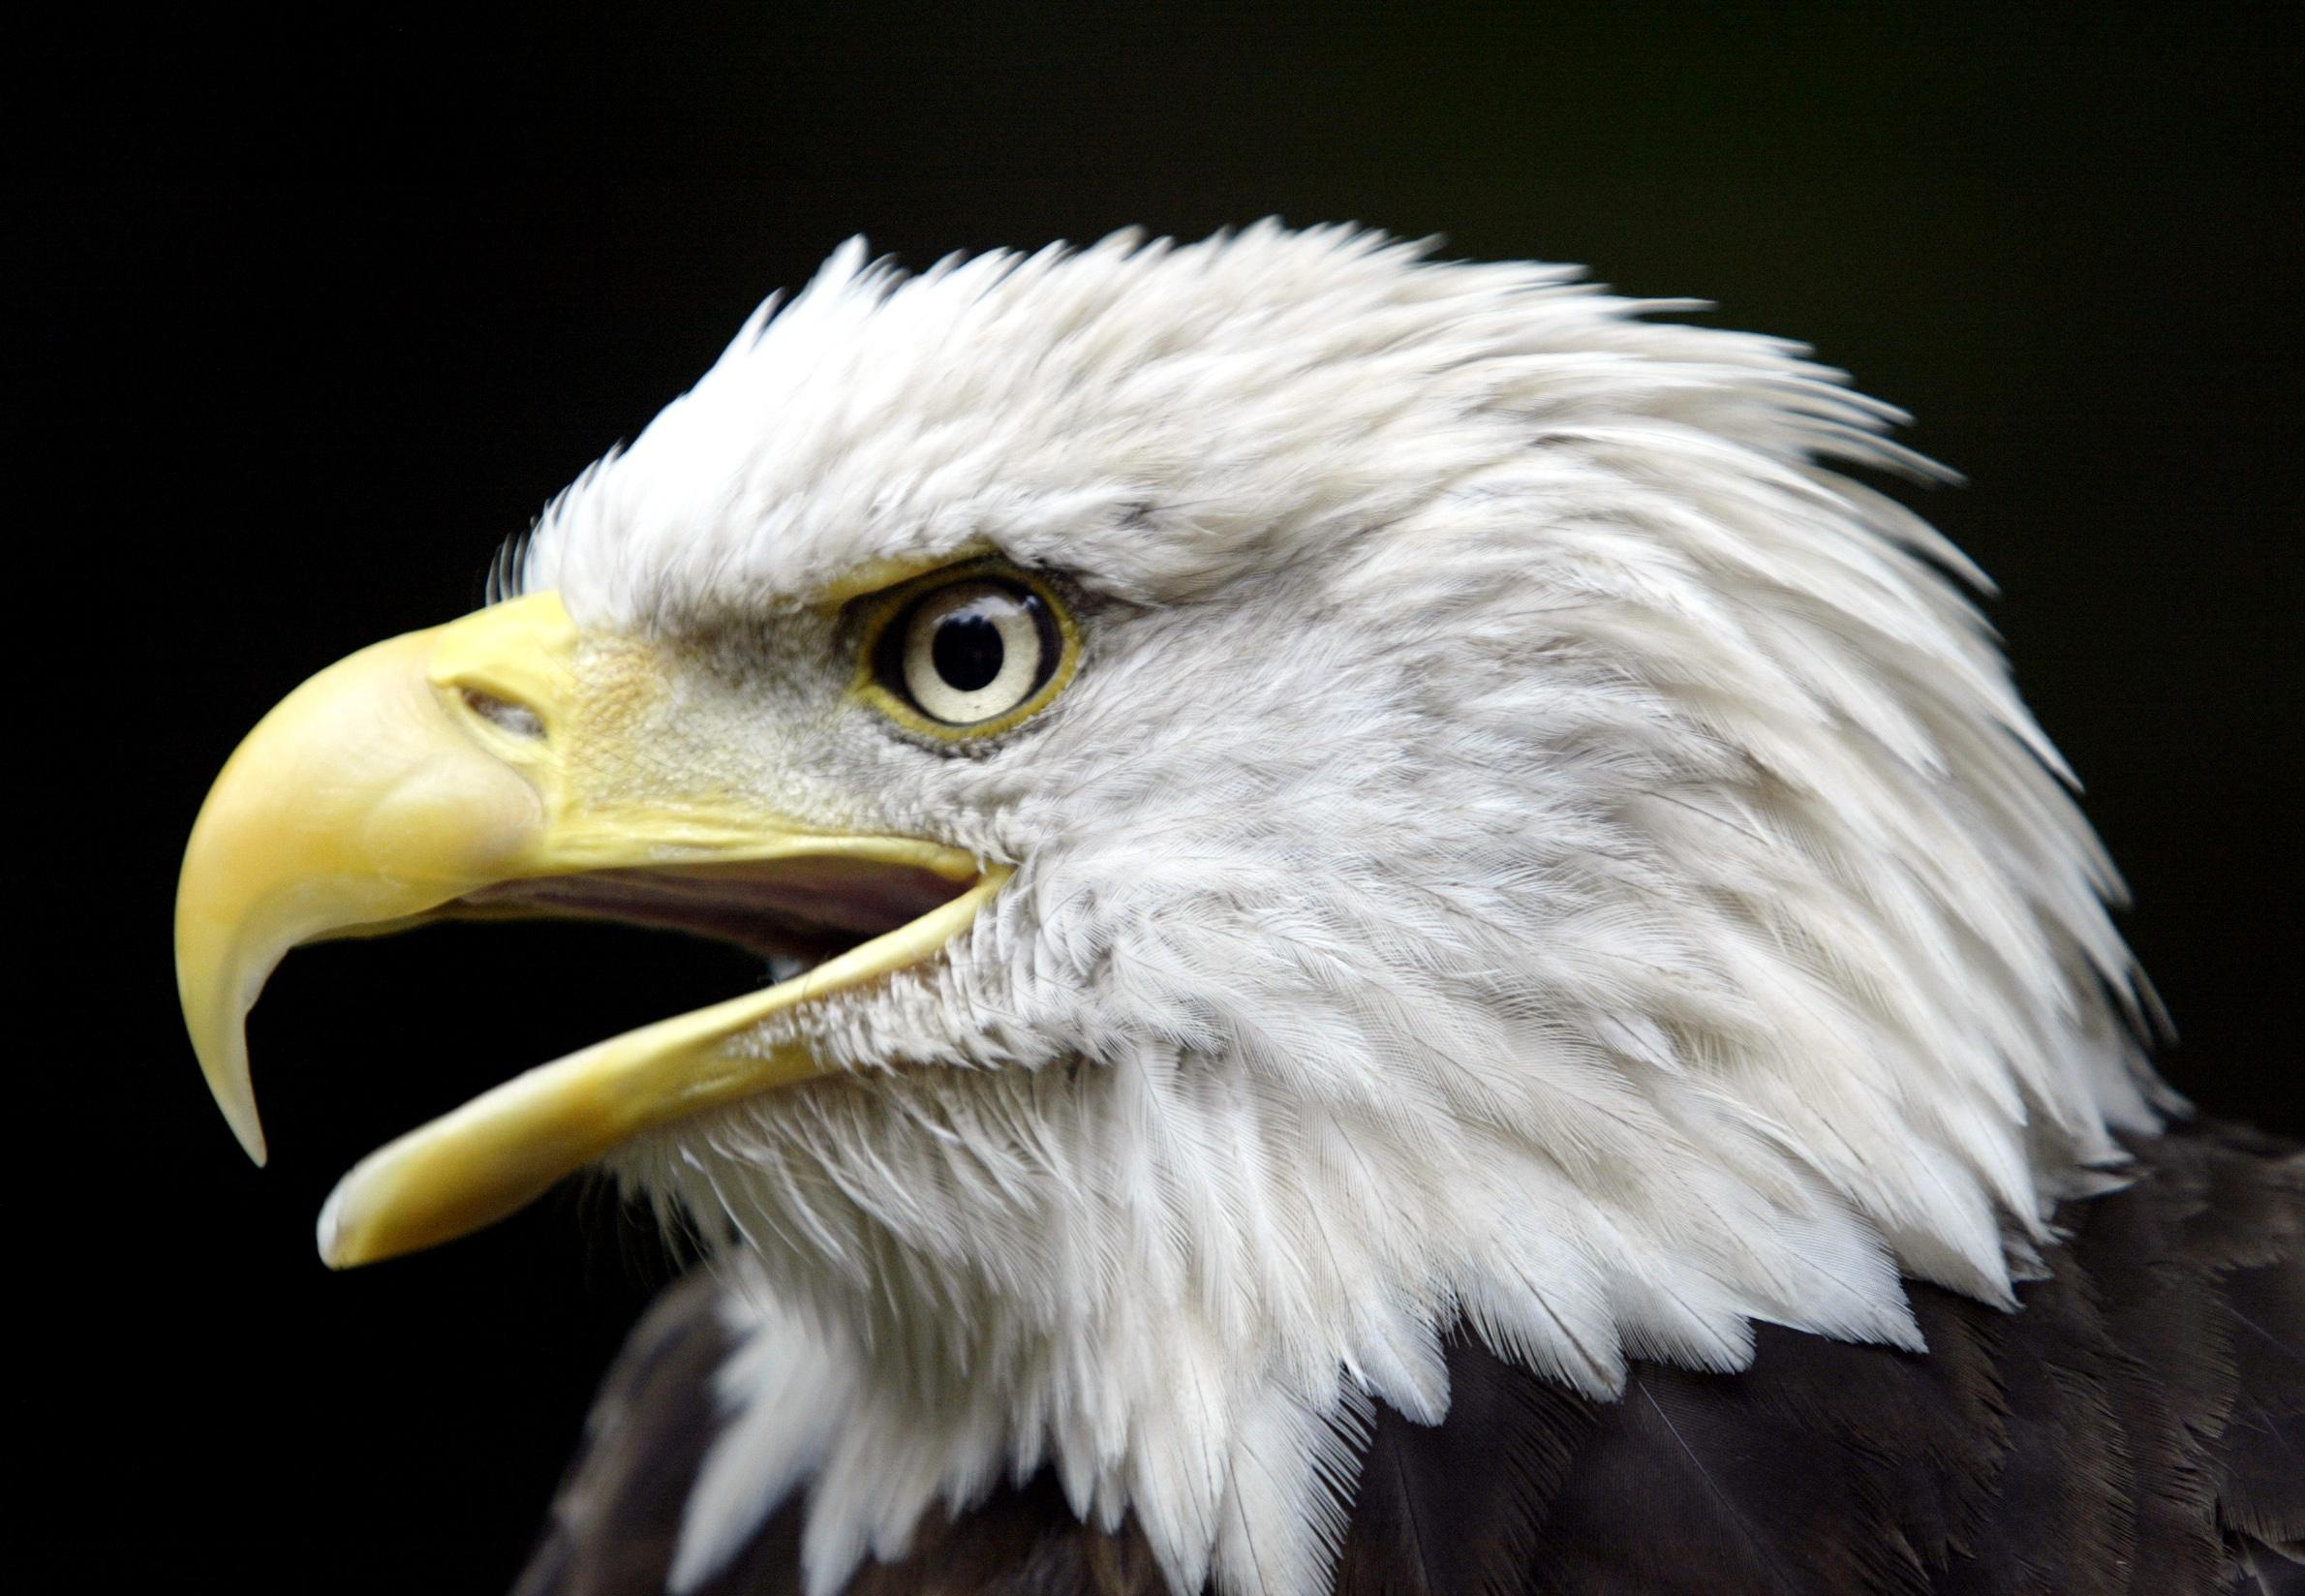 Bald eagles have gradually returned to New York City